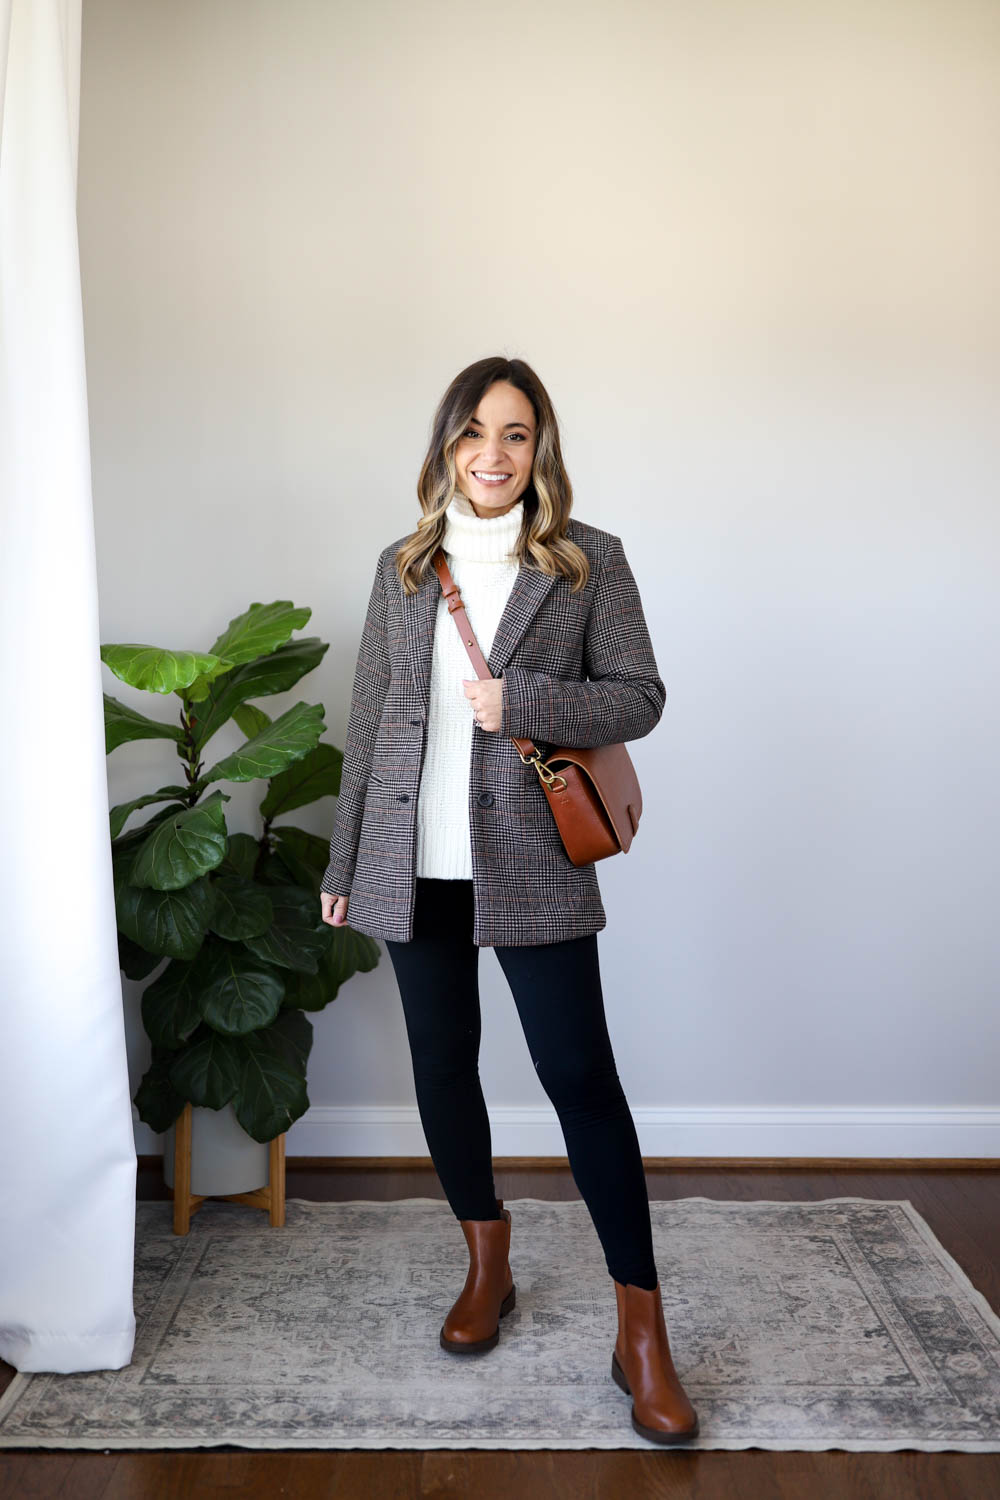 Winter Boot Outfits: The Winter Style Guide